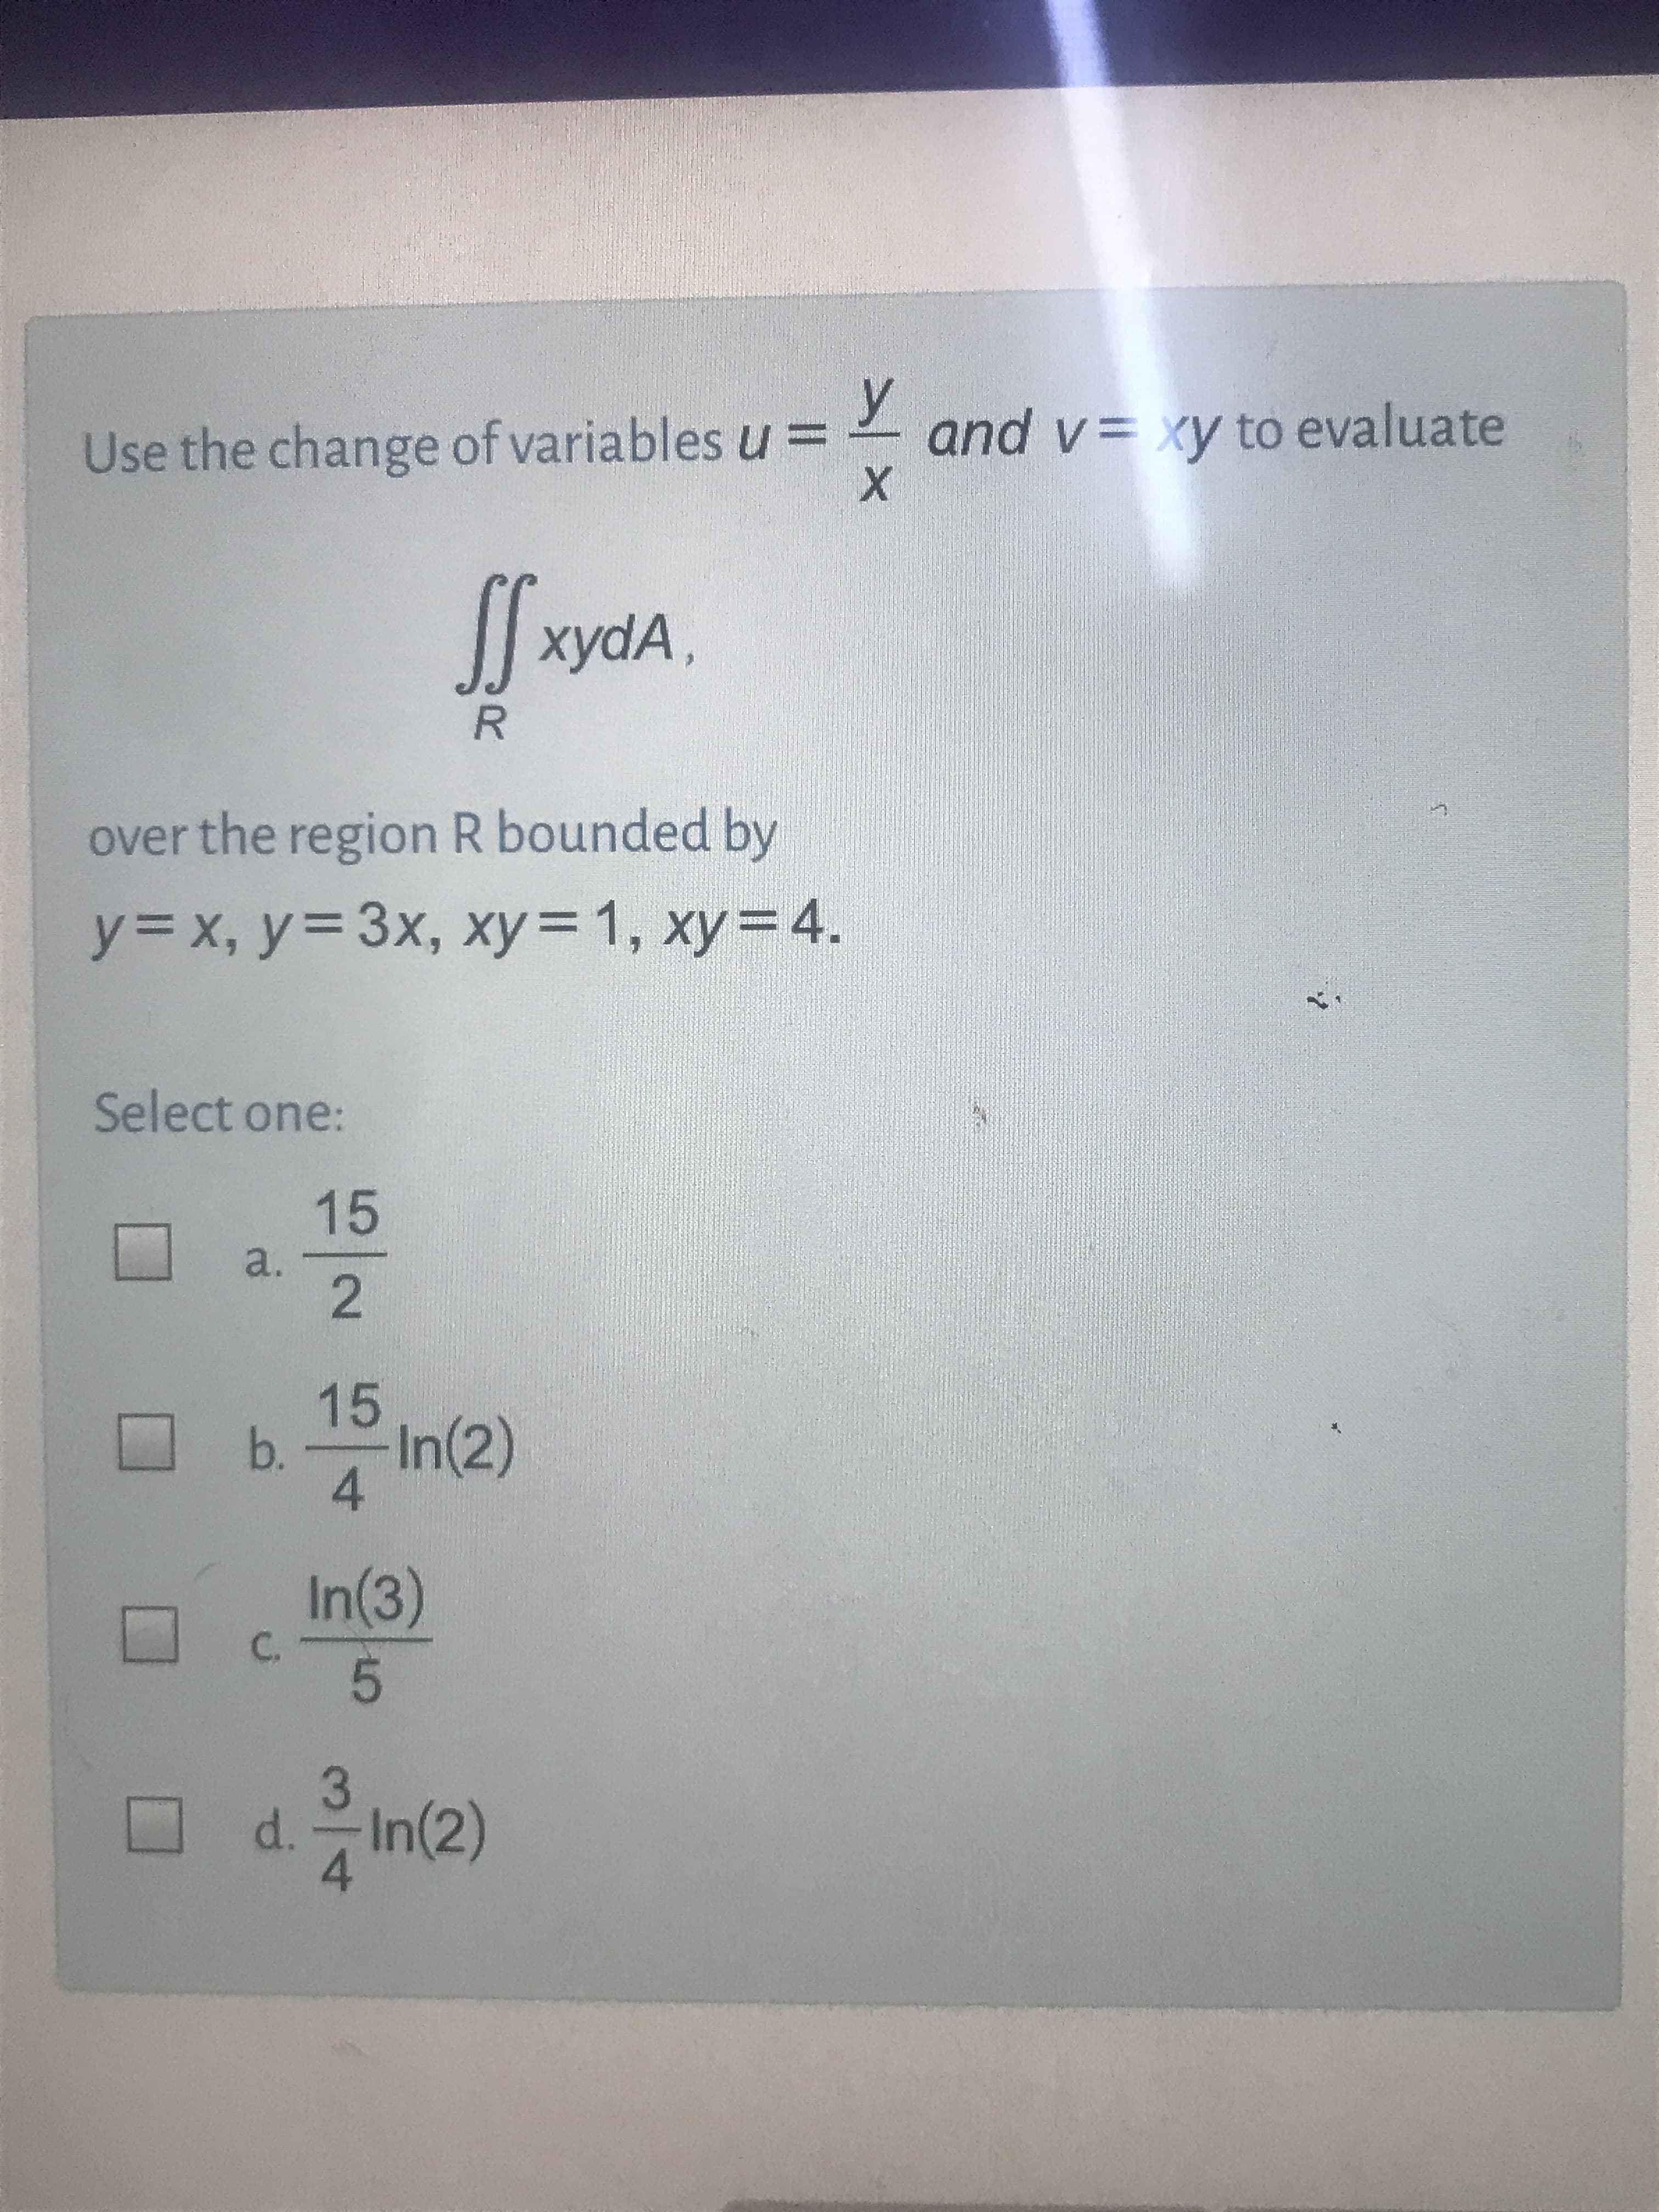 Use the change of variables u =
y
and v= xy to evaluate
xydA,
over the region R bounded by
y= x, y3 3x, xy 1, xy=4.
%3D
